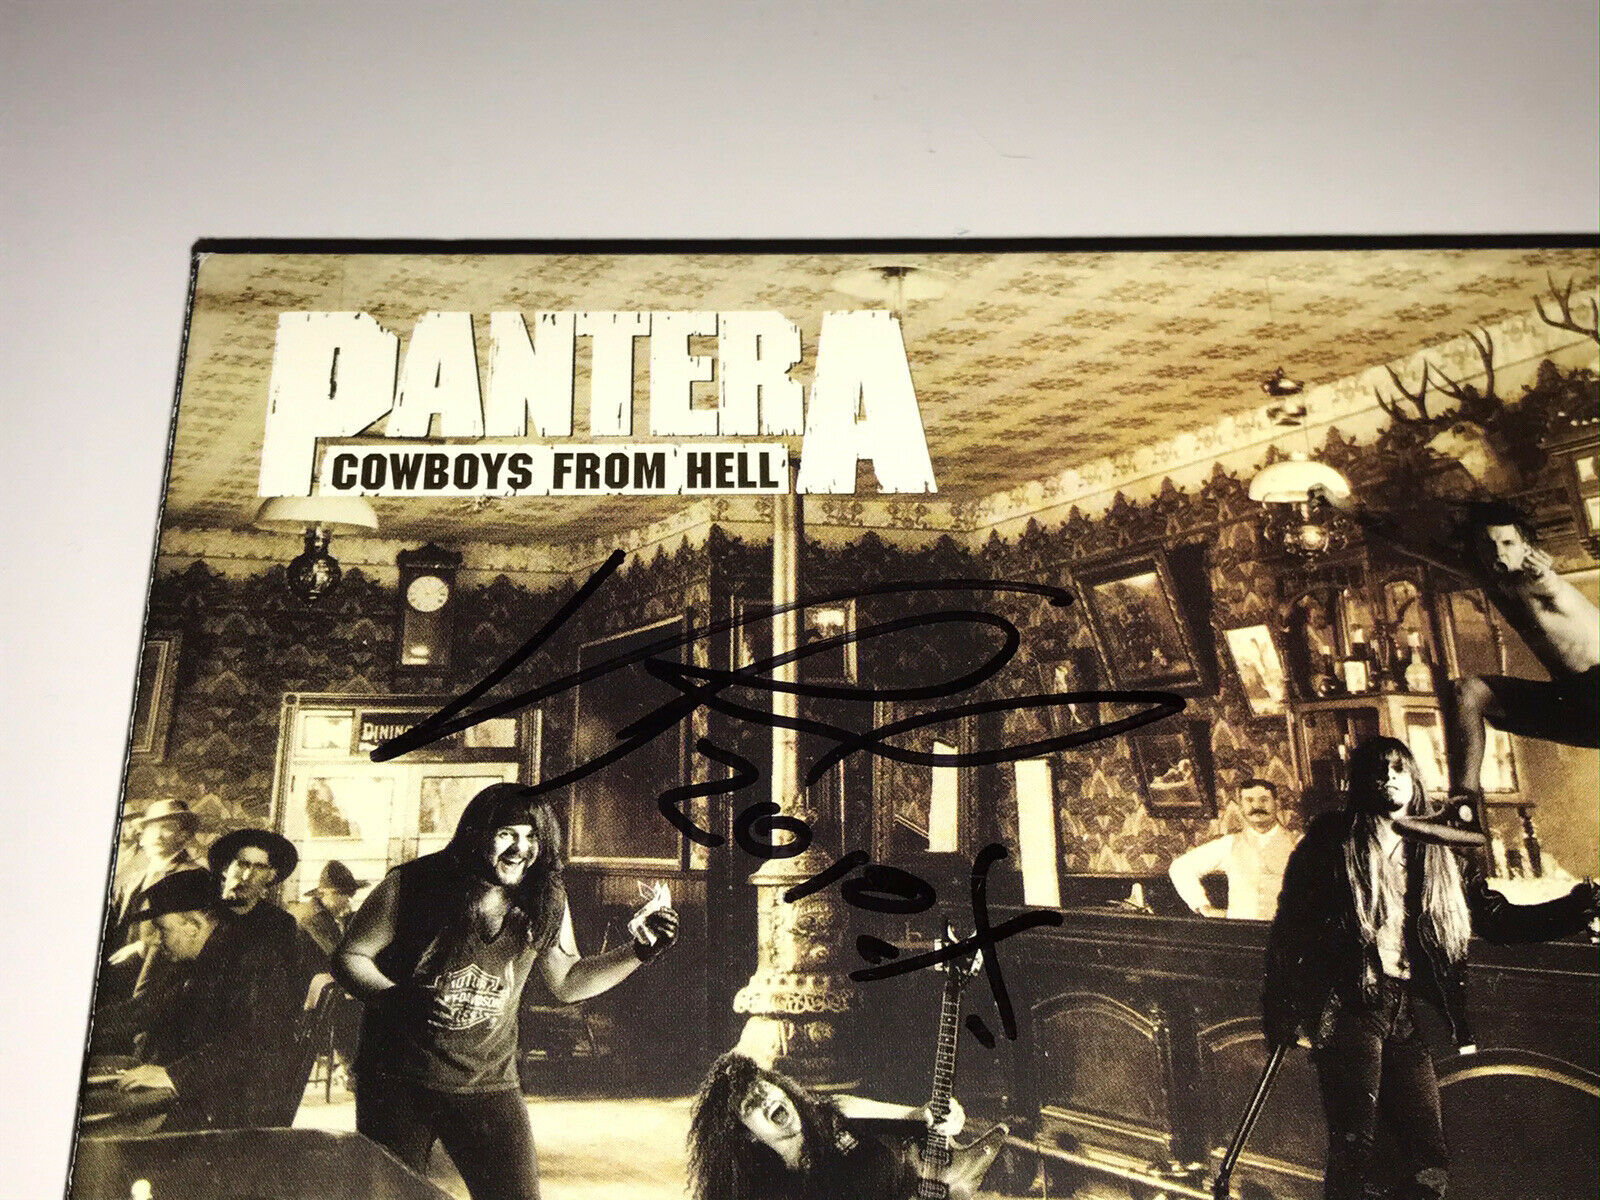 Cowboys From Hell [3 Disc] [PA] [Digipak] by Pantera (CD, Sep- 3 Discs, Rhino (Label)) online